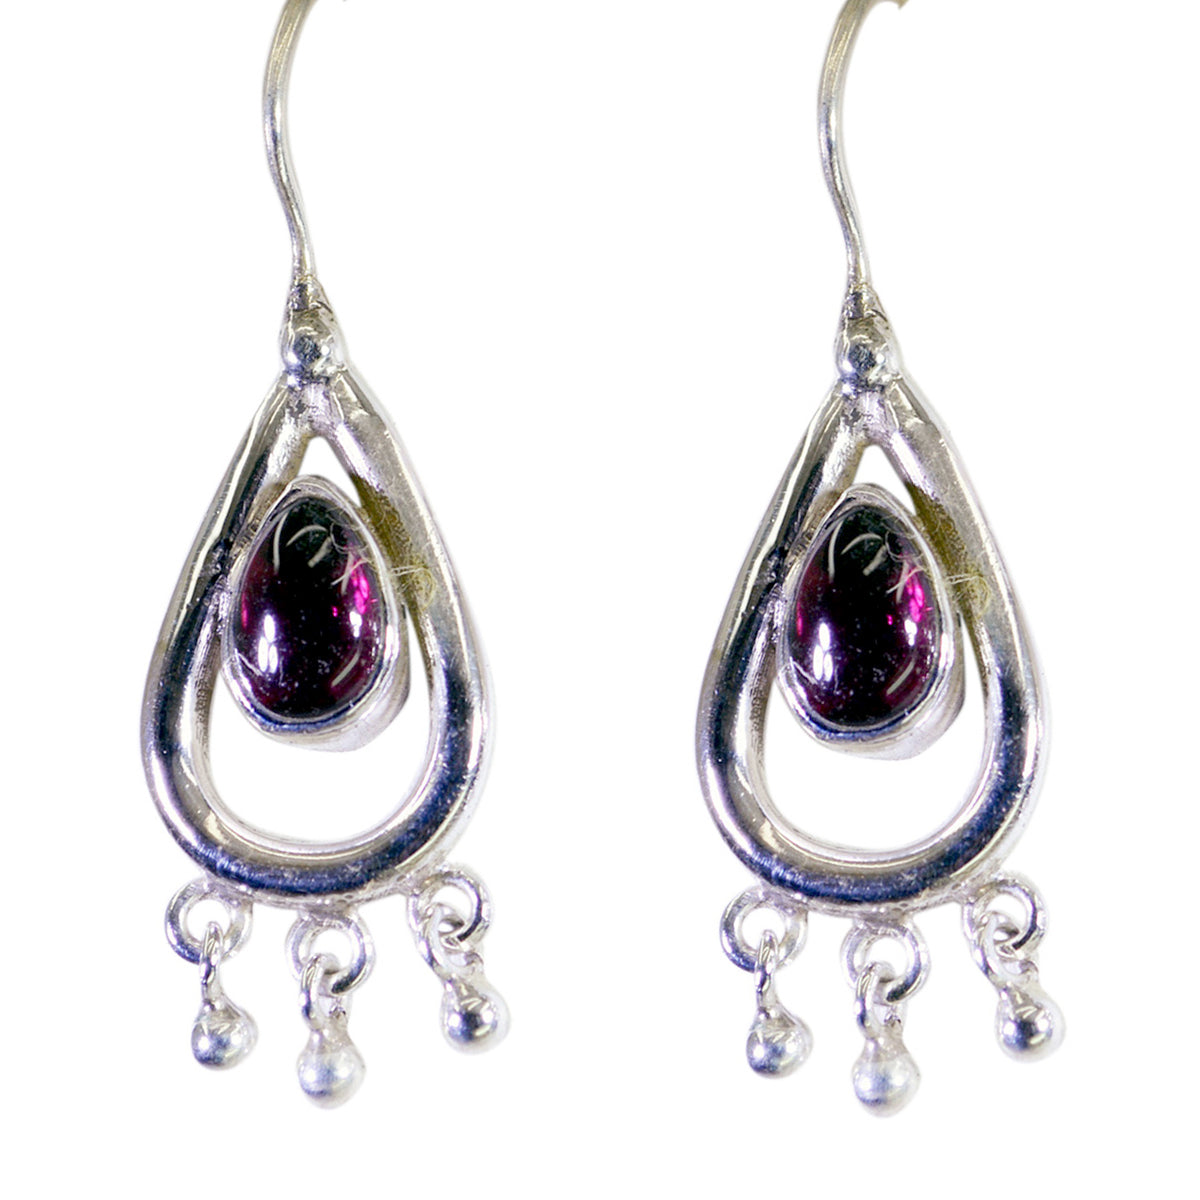 Riyo Real Gemstones Pear Cabochon Red Garnet Silver Earrings gift for independence day